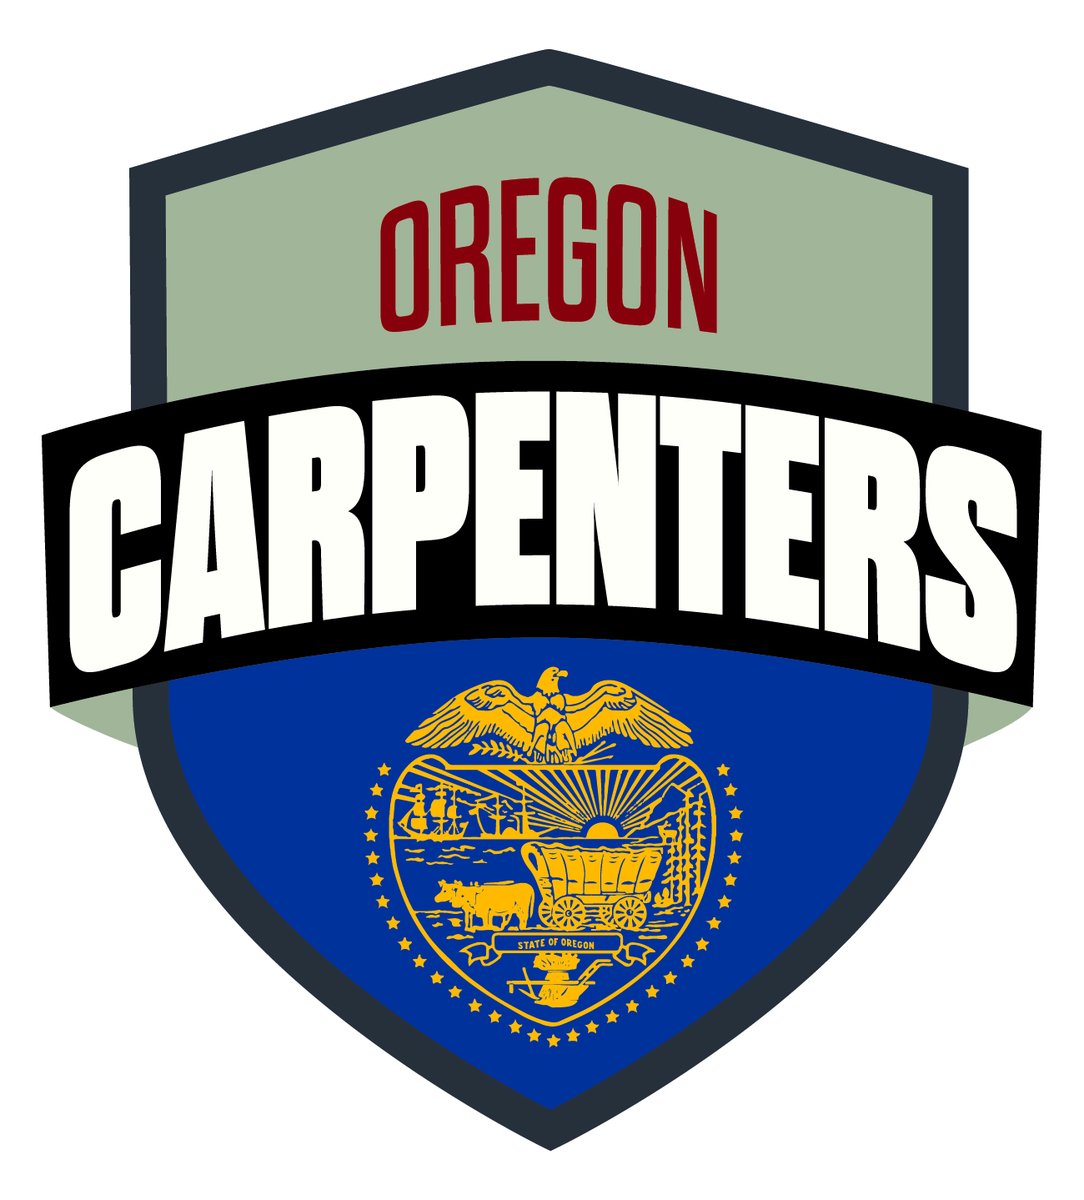 Next up in our new states logo reveal is #TheBeaverState. Join us in welcoming Oregon #UnionCarpenters to the #SWMSRCC. Tune in tomorrow for the Alaska logo reveal.#SWMSCarpenters #JobsWagesBenefits #Brotherhood #UnionStrong #Carpenters #WeBuildAmerica #BorderToBorder #UnionProud